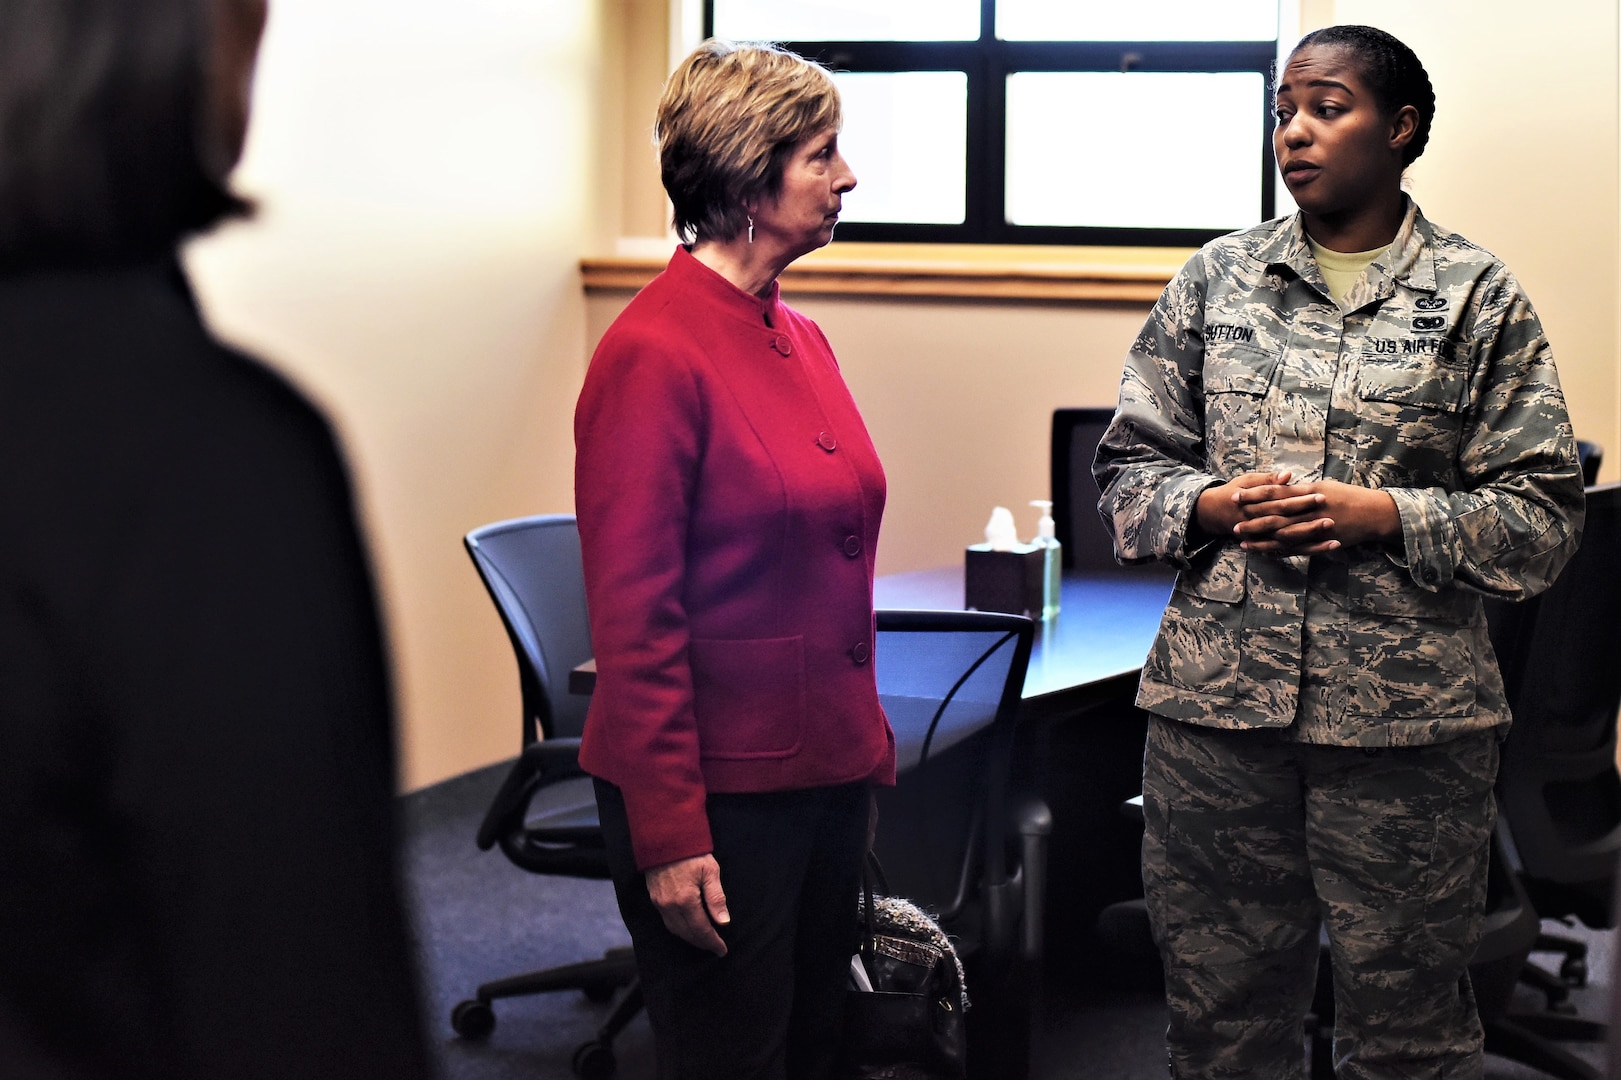 Laura Hyten speaks with Staff Sgt. Jasmine Sutton, 341st Missile Wing special victims counsel paralegal, at the Malmstrom Air Force Base resiliency center in Montana, Jan. 17, 2018. Mrs. Hyten is married to U.S. Air Force Gen. John Hyten (not pictured), commander of U.S. Strategic Command (USSTRATCOM). While there, Gen. and Mrs. Hyten met with base leaders and airmen to thank them for their support to USSTRATCOM’s deterrence mission. She also toured facilities at the base, including the resiliency center, maintenance bay and community center. (U.S. Air Force photo by Kiersten McCutchan)